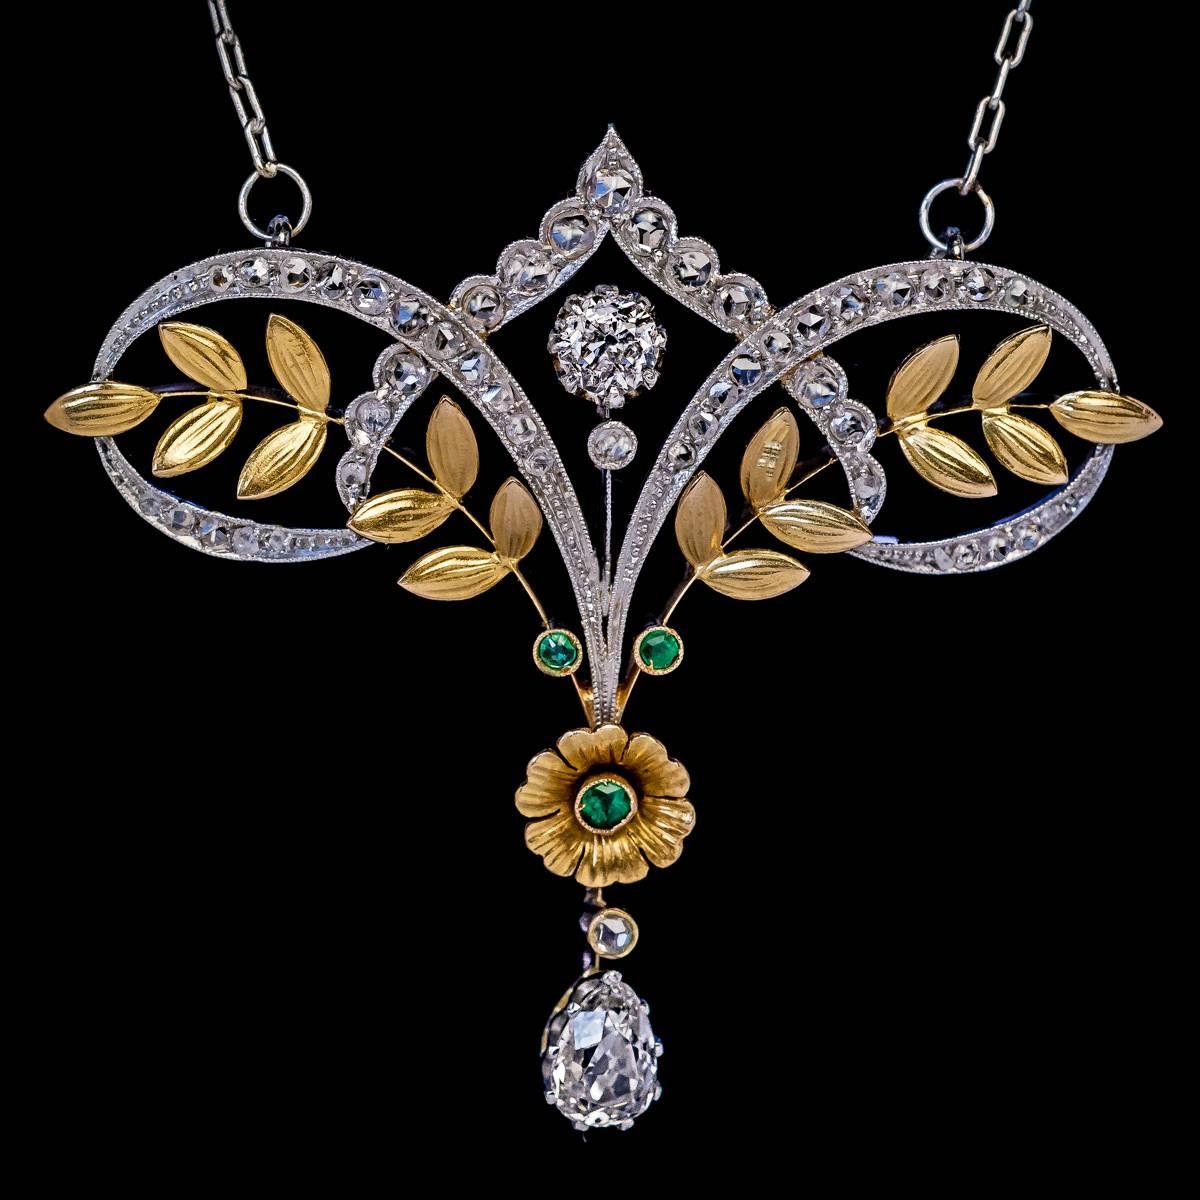 Circa 1910

An antique Edwardian era elegant garland-motif necklace is handcrafted in platinum and 18K gold. The necklace is embellished with brilliant and rose cut diamonds, and three small emeralds.

The drop shaped diamond measures 6.3 x 4.5 x